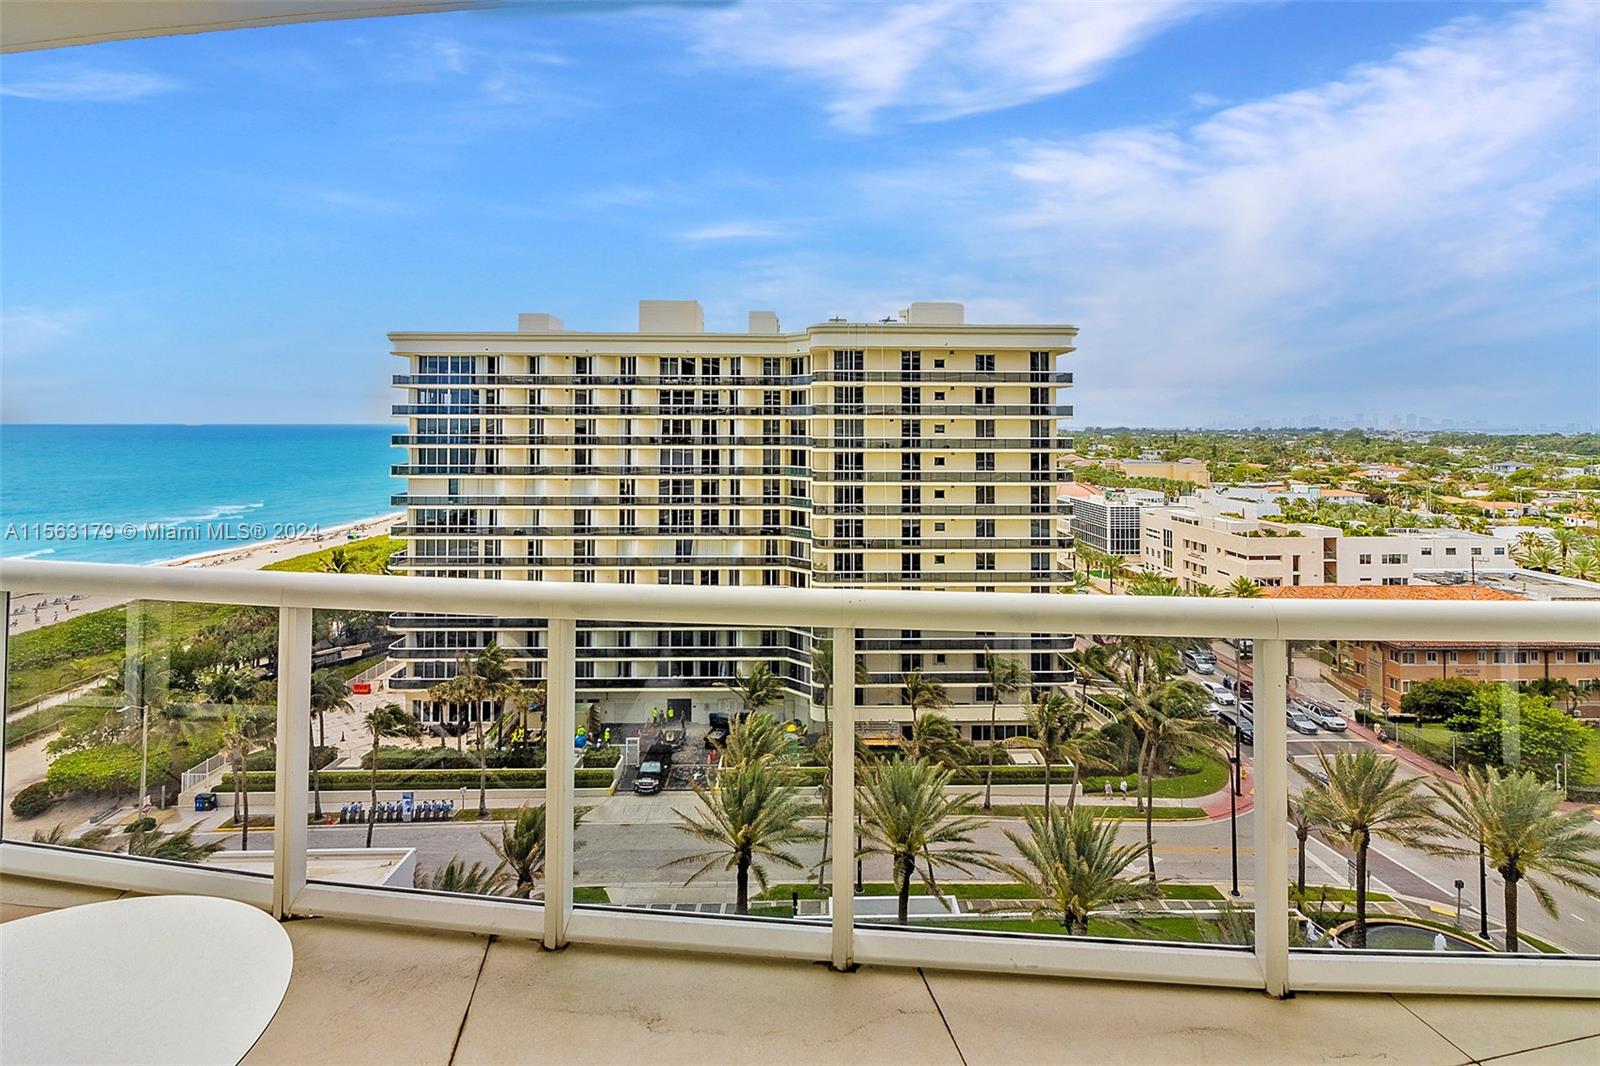 Stunning contemporary south facing home w/ 2 bed, 2.5 baths, entirely renovated w/ high-end finishes, furniture & materials incl. Viking Appliances, a private elevator, W/D, two on-suite baths, large walk in closets & more, a true Designer Unit. Enjoy Spectacular Ocean & City Views from the south facing flr to ceil. windows from every rm. Unit boasts 2160 SF w/ an oversized living/dining + Den & an open kitchen.

Miami lifestyle at its finest w/ private beach , serviced pool, concierge, outstanding Spa, fitness center w/ exercise classes, gourmet restaurant, valet, drmn w/ 24H security, boardwalk path, tennis & basketball court... Right across from Famous Bal Harbour Shops , Trendy restaurants.. A Must see Top of the Line Turn Key apartment, Delivered Furnished (Also for avail for sale)